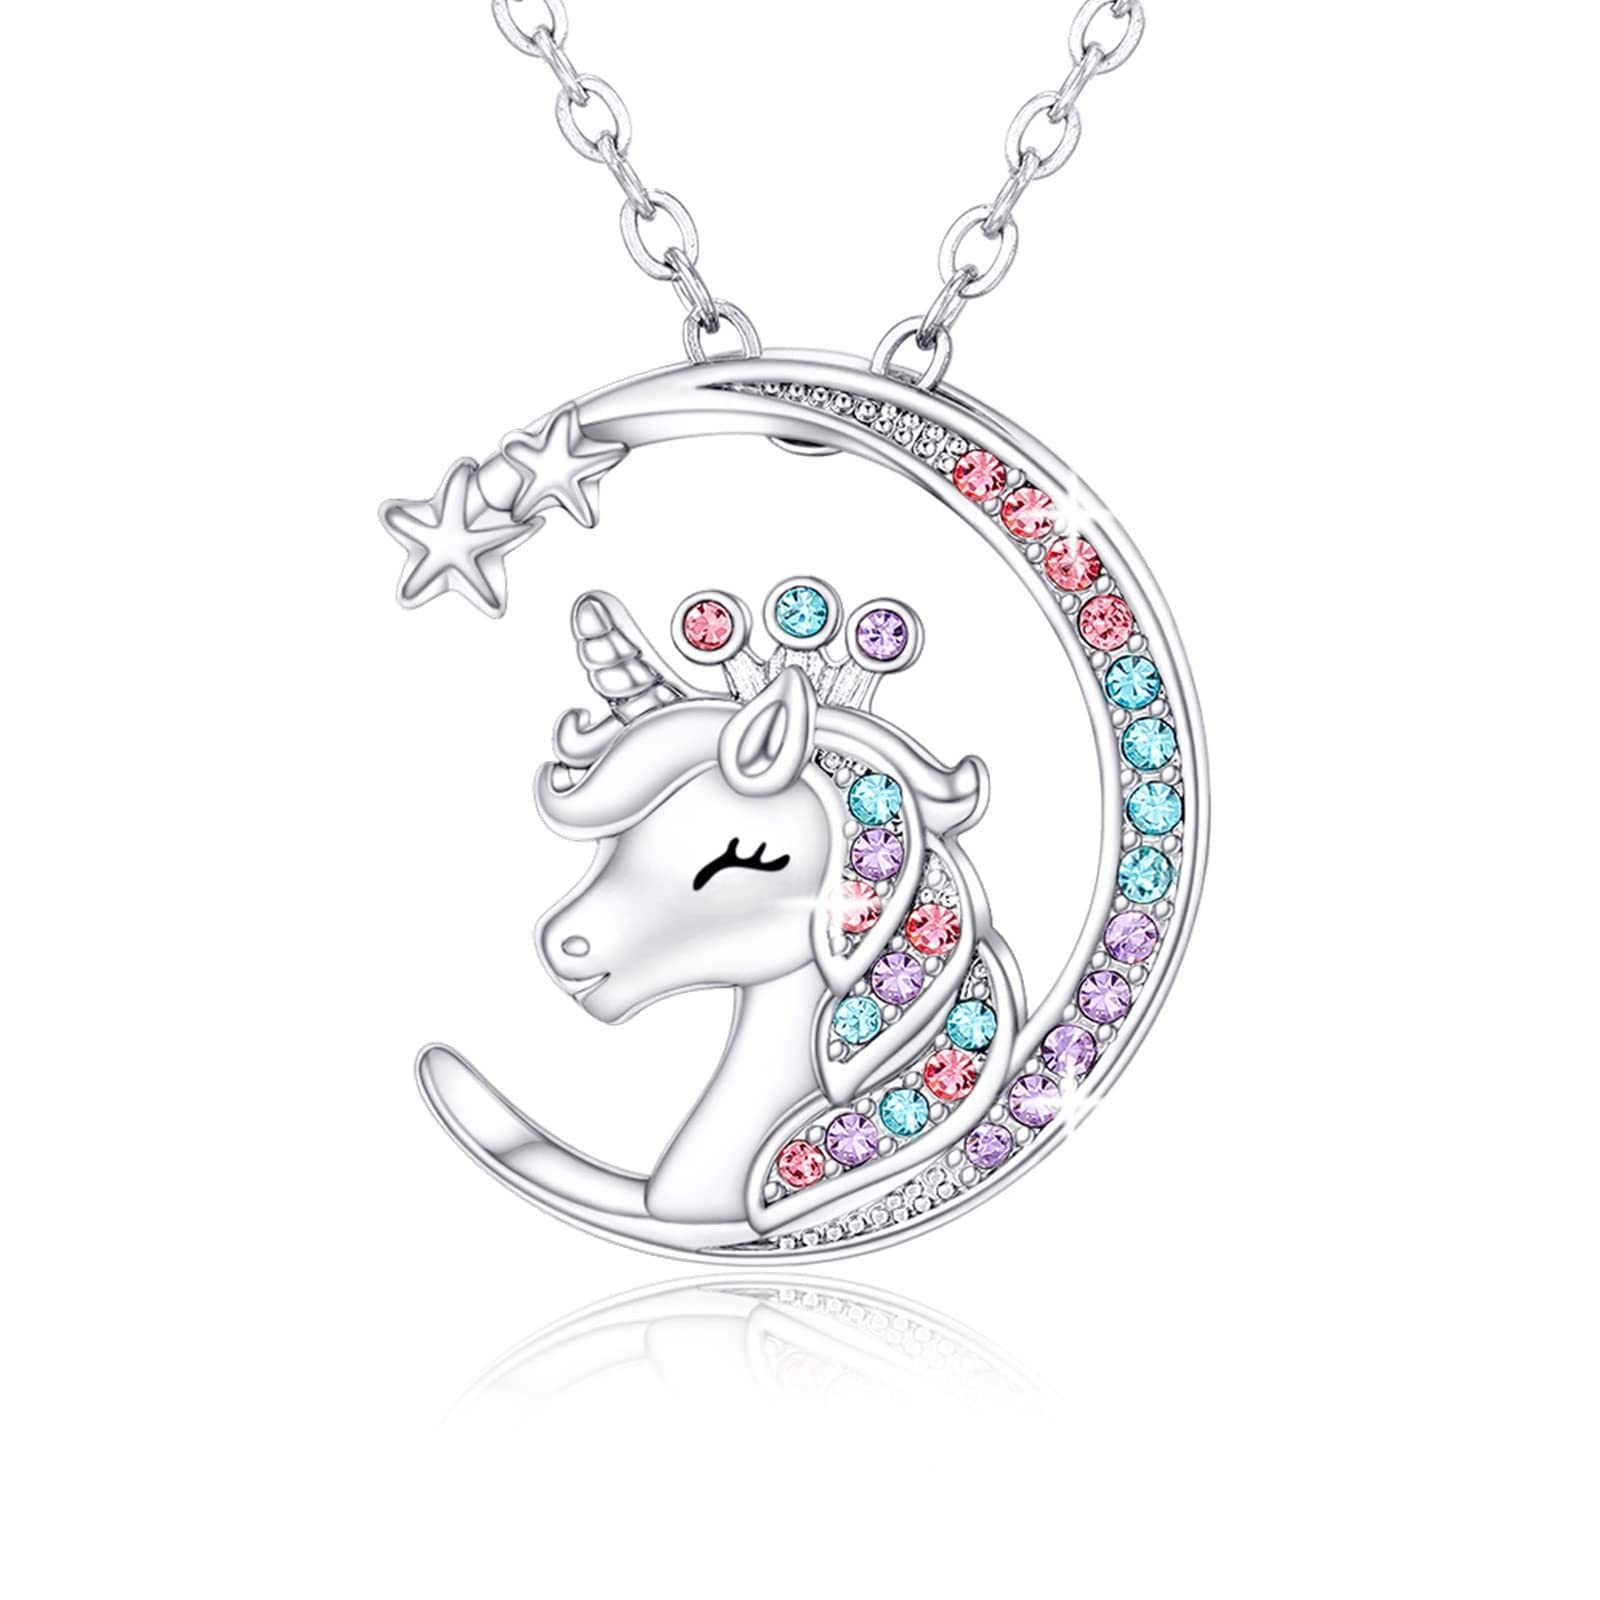 Luckimoli You are Magical Unicorn Necklace for Girls Crystal Pendant Necklaces Unicorn Jewelry Gifts for Girls Daughter Granddaughter Niece Birthday